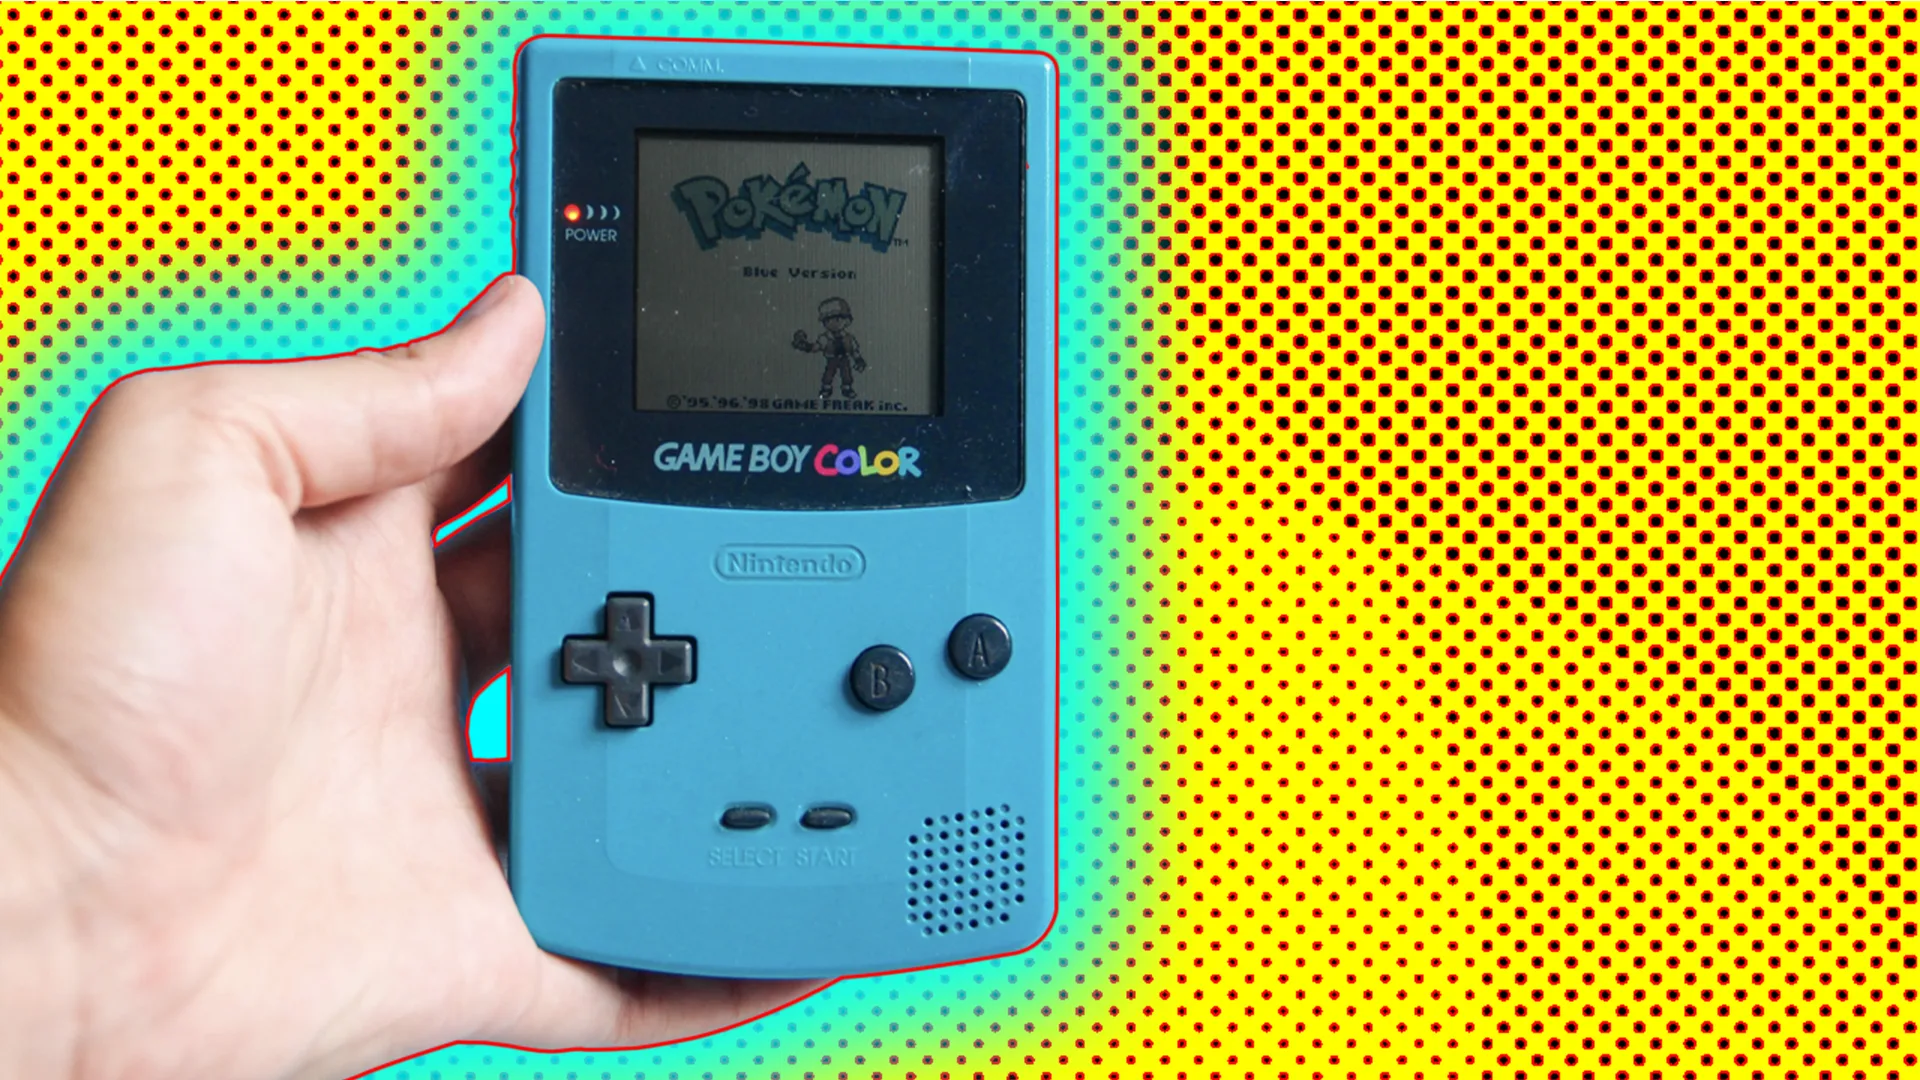 Someone holding a Pokemon Blue game on the gameboy colour. The background is yellow and there is a blue glow around the hand and the game device